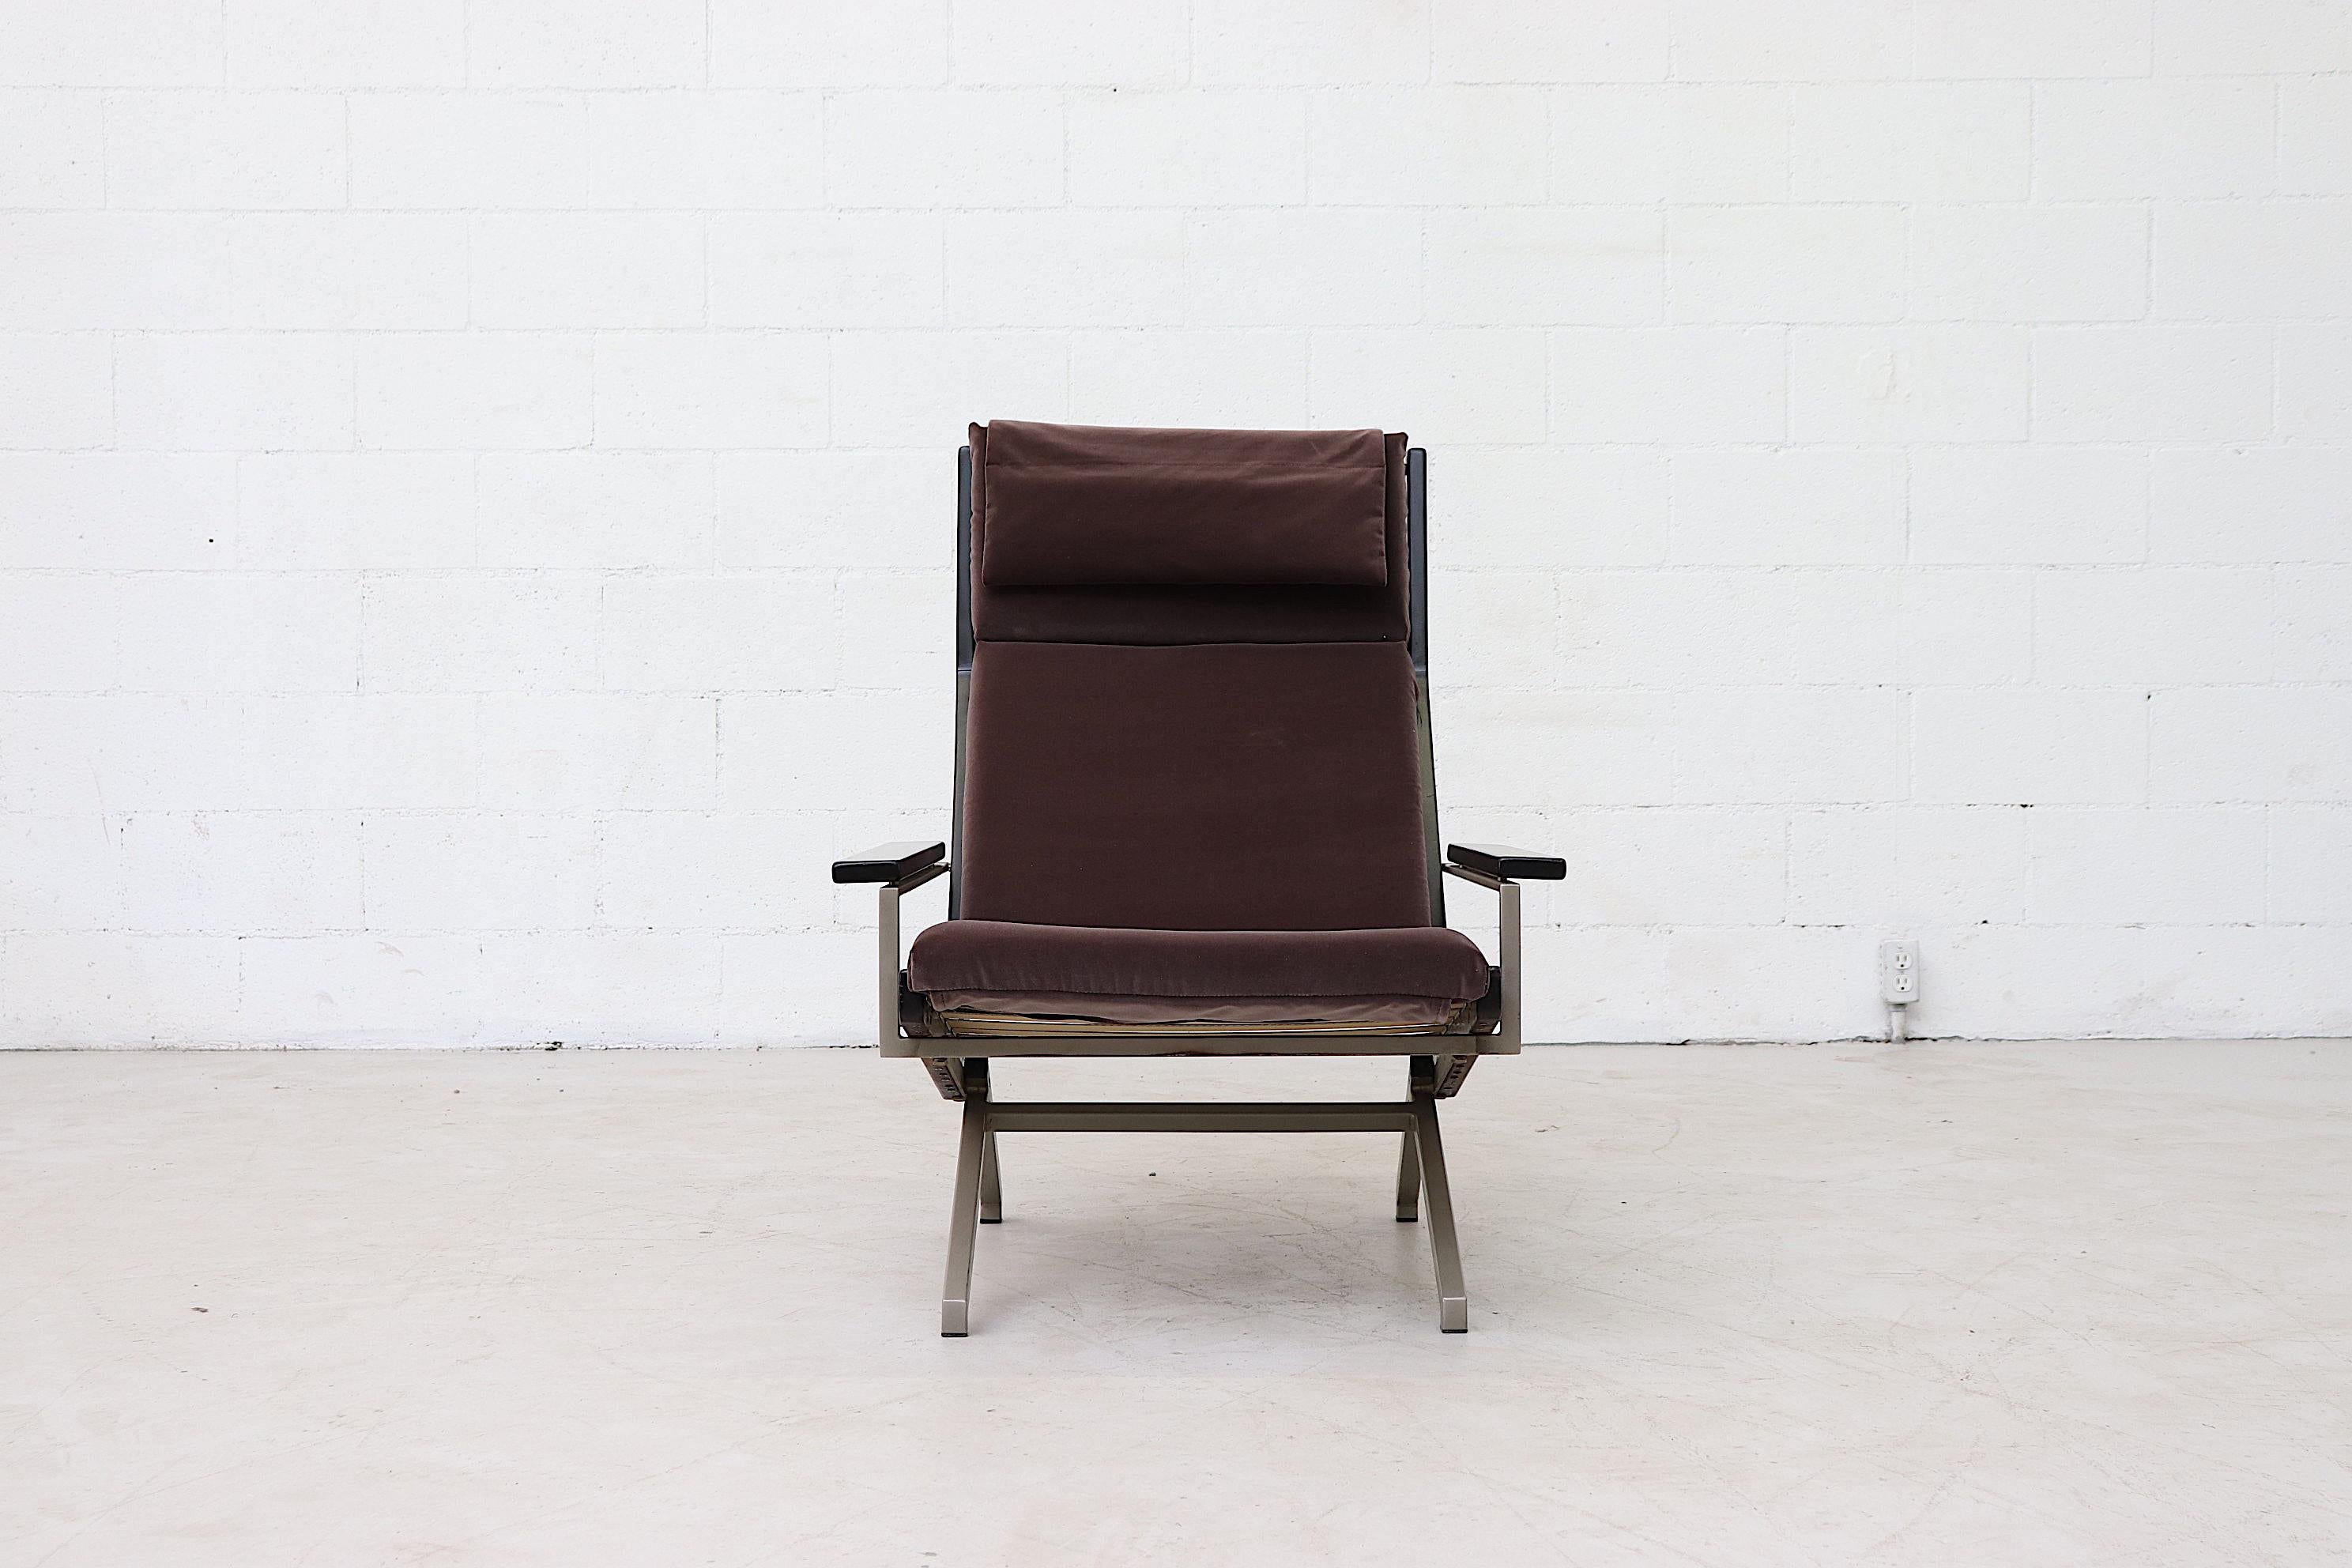 Beautiful Masculine lounge chair by Robert Parry in ebonized teak and brushed steel with mahogany grey-brown velvet cushion. 1970s cool! Gelderland, or originally Meuelfabriek Gelderland (Gelderland Furniture Factory) established in 1935 in